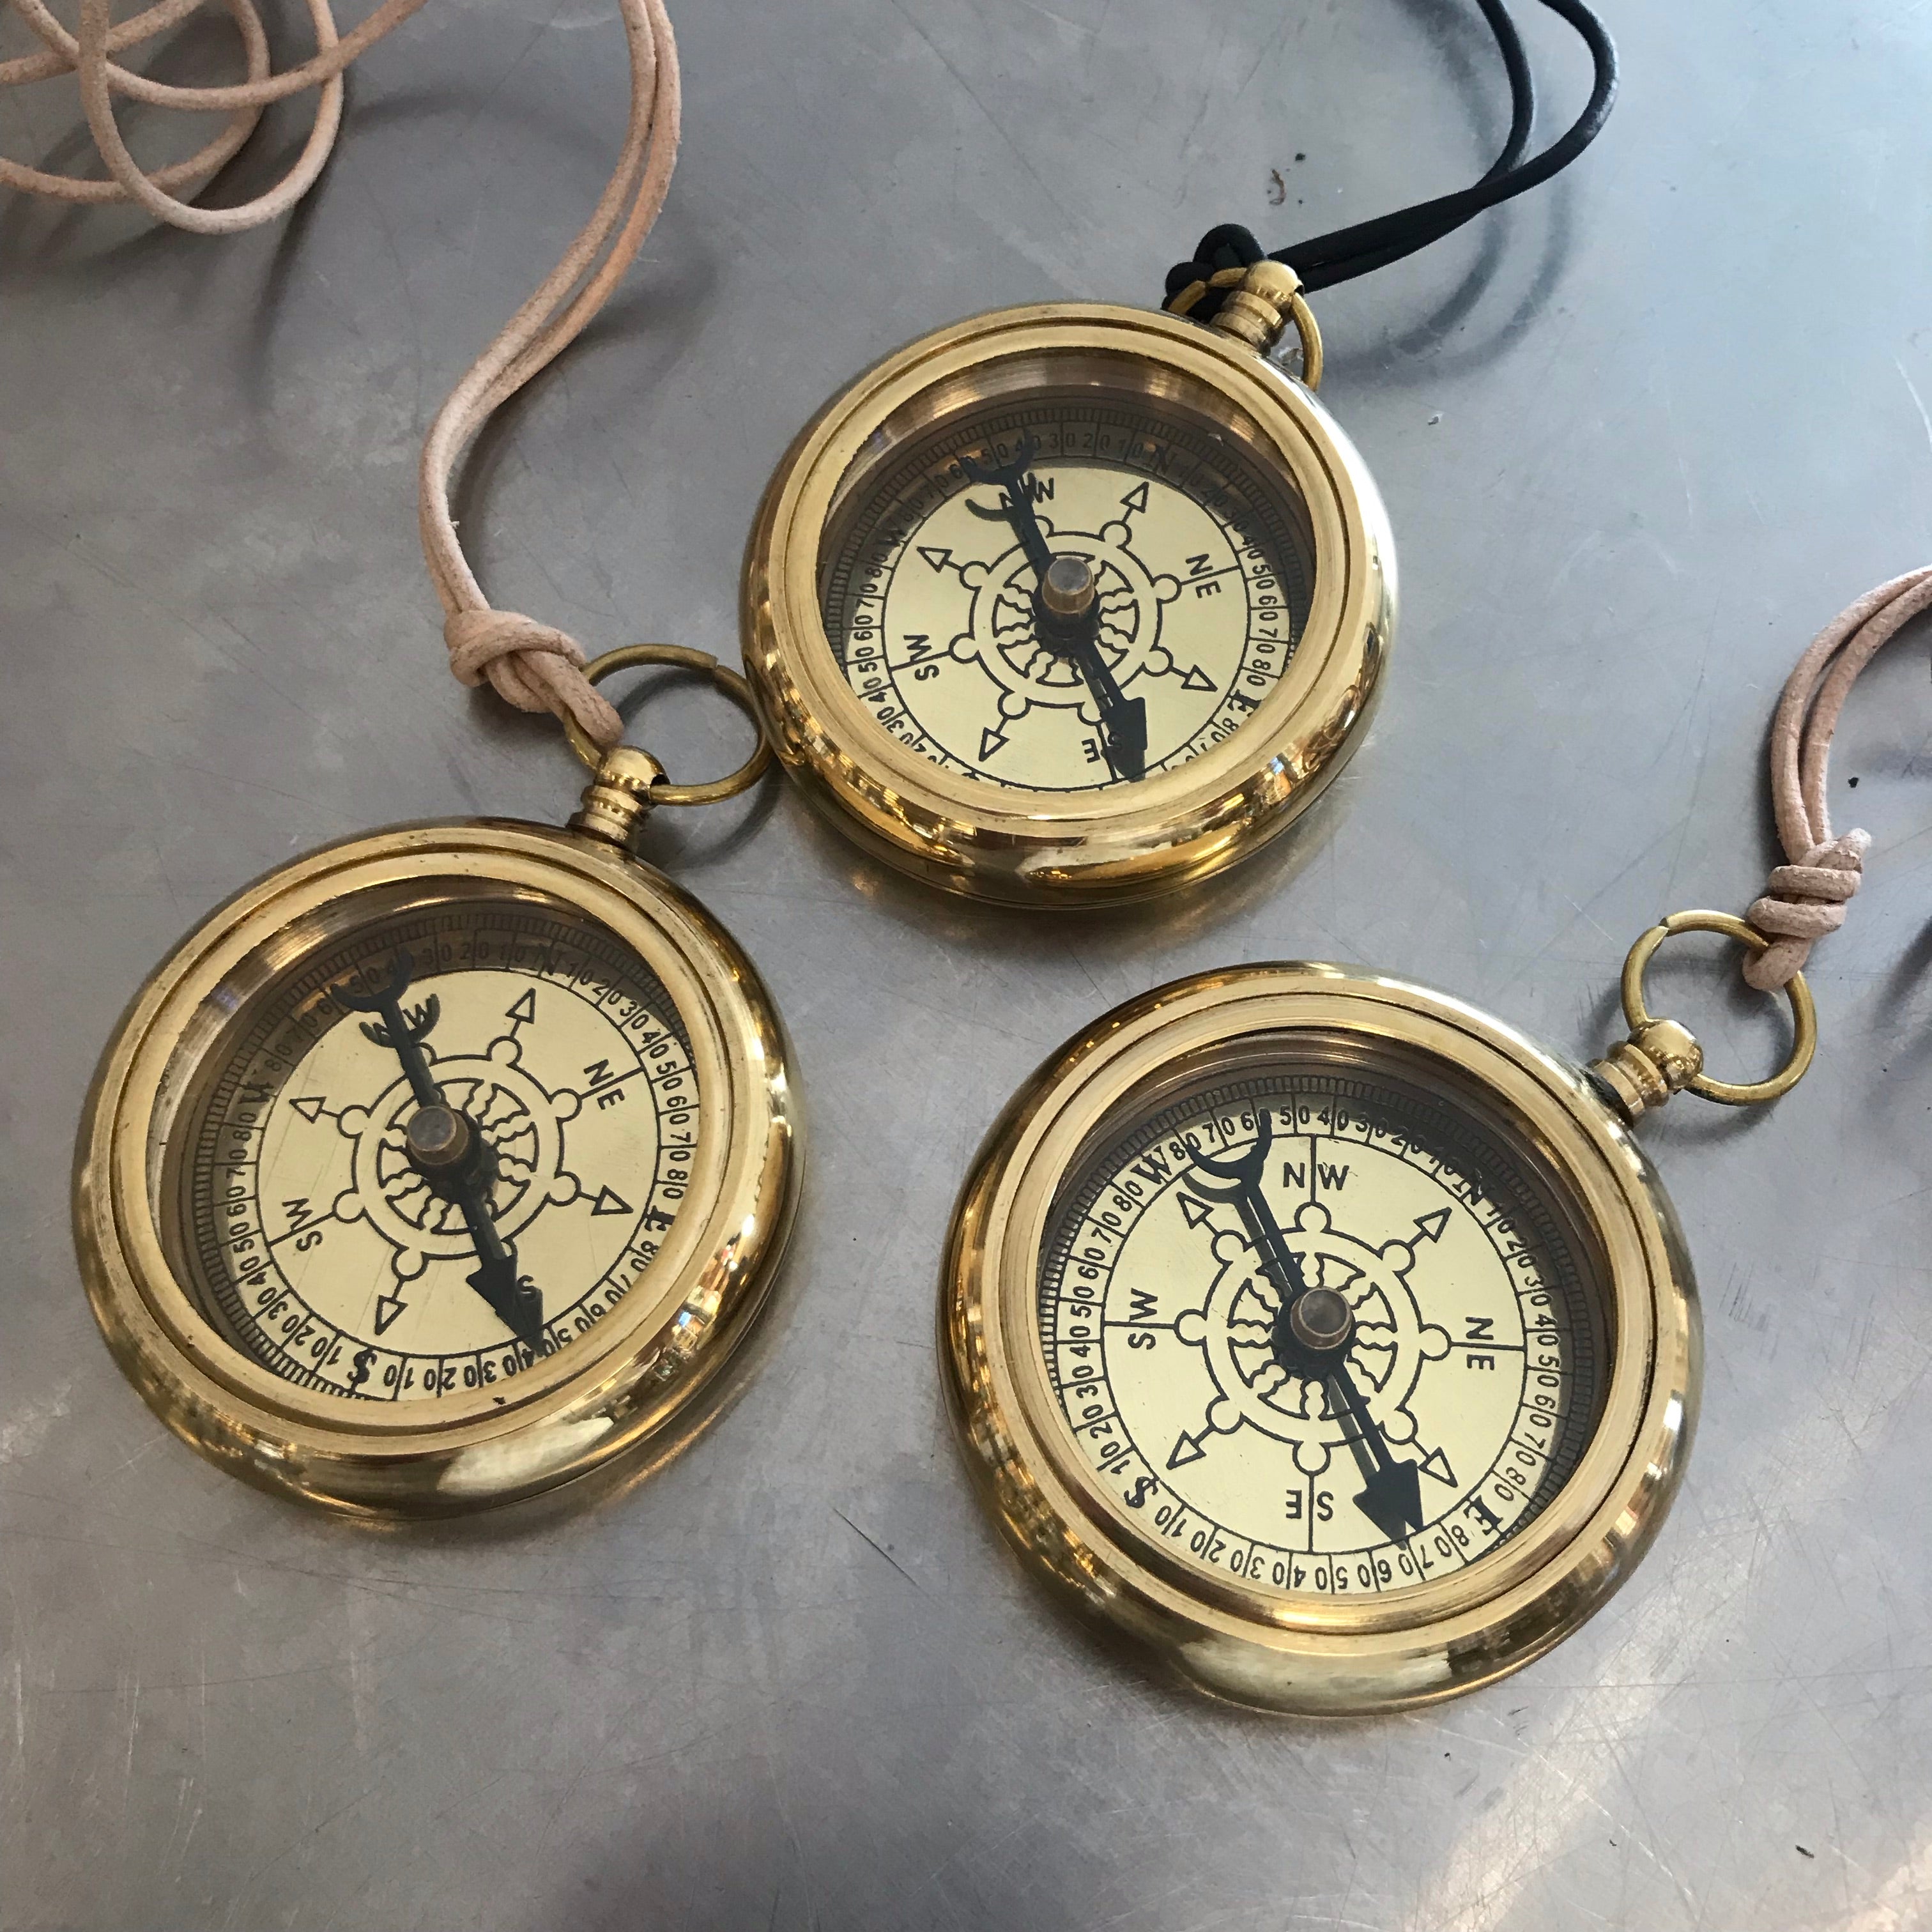 Jewelry, brass compass on leather